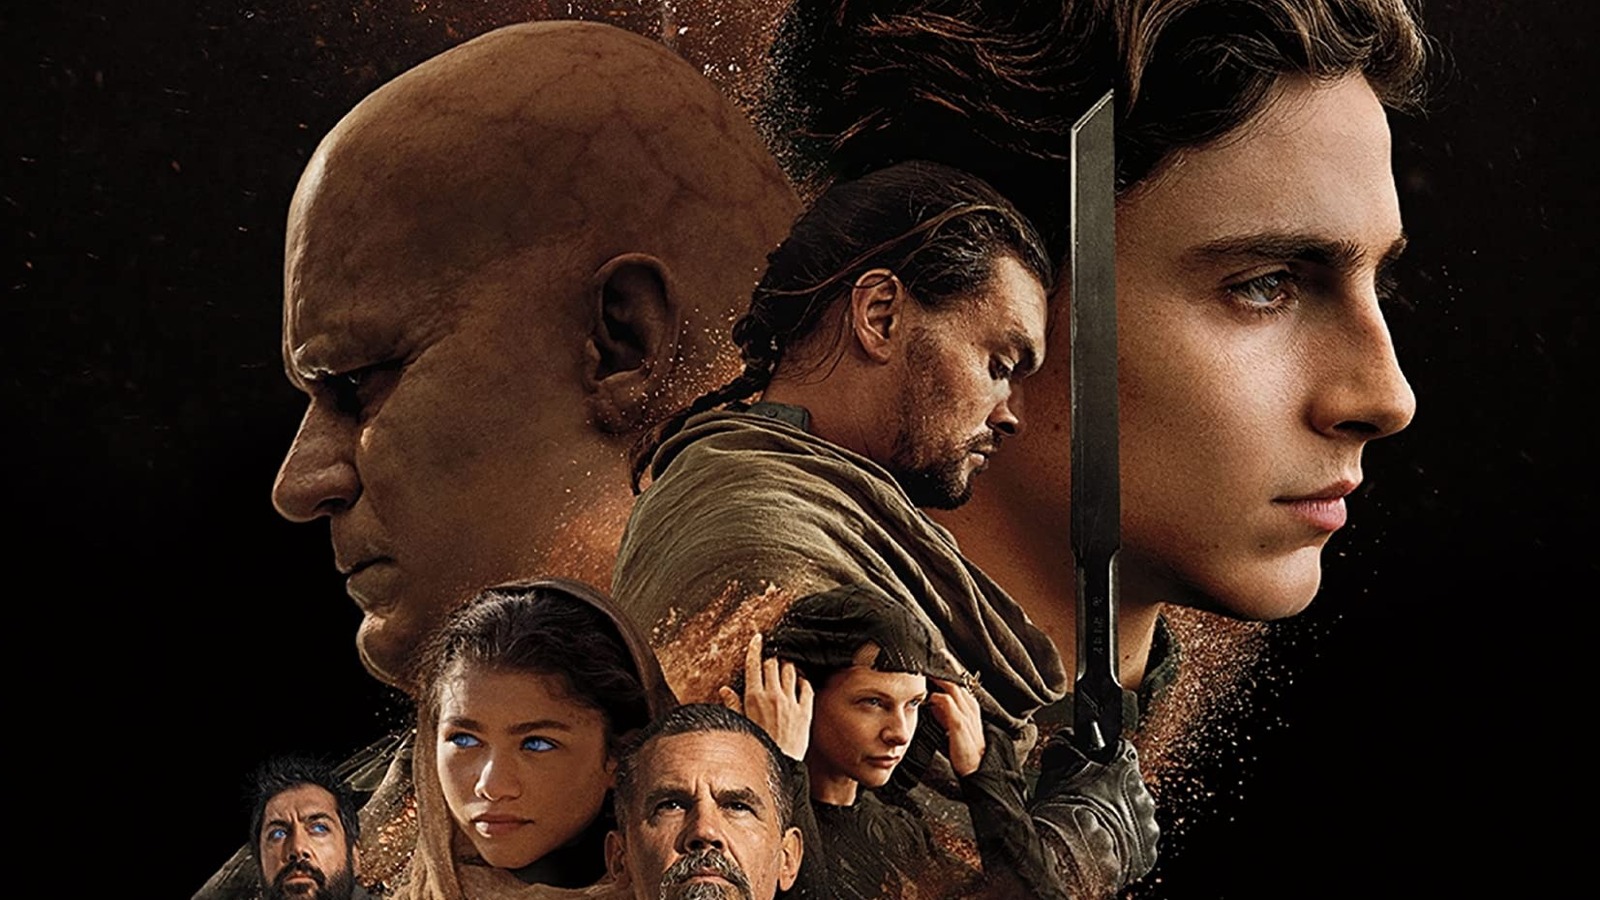 Dune Passes $100 Million At Domestic Box Office In Great Boost For The Spice Economy